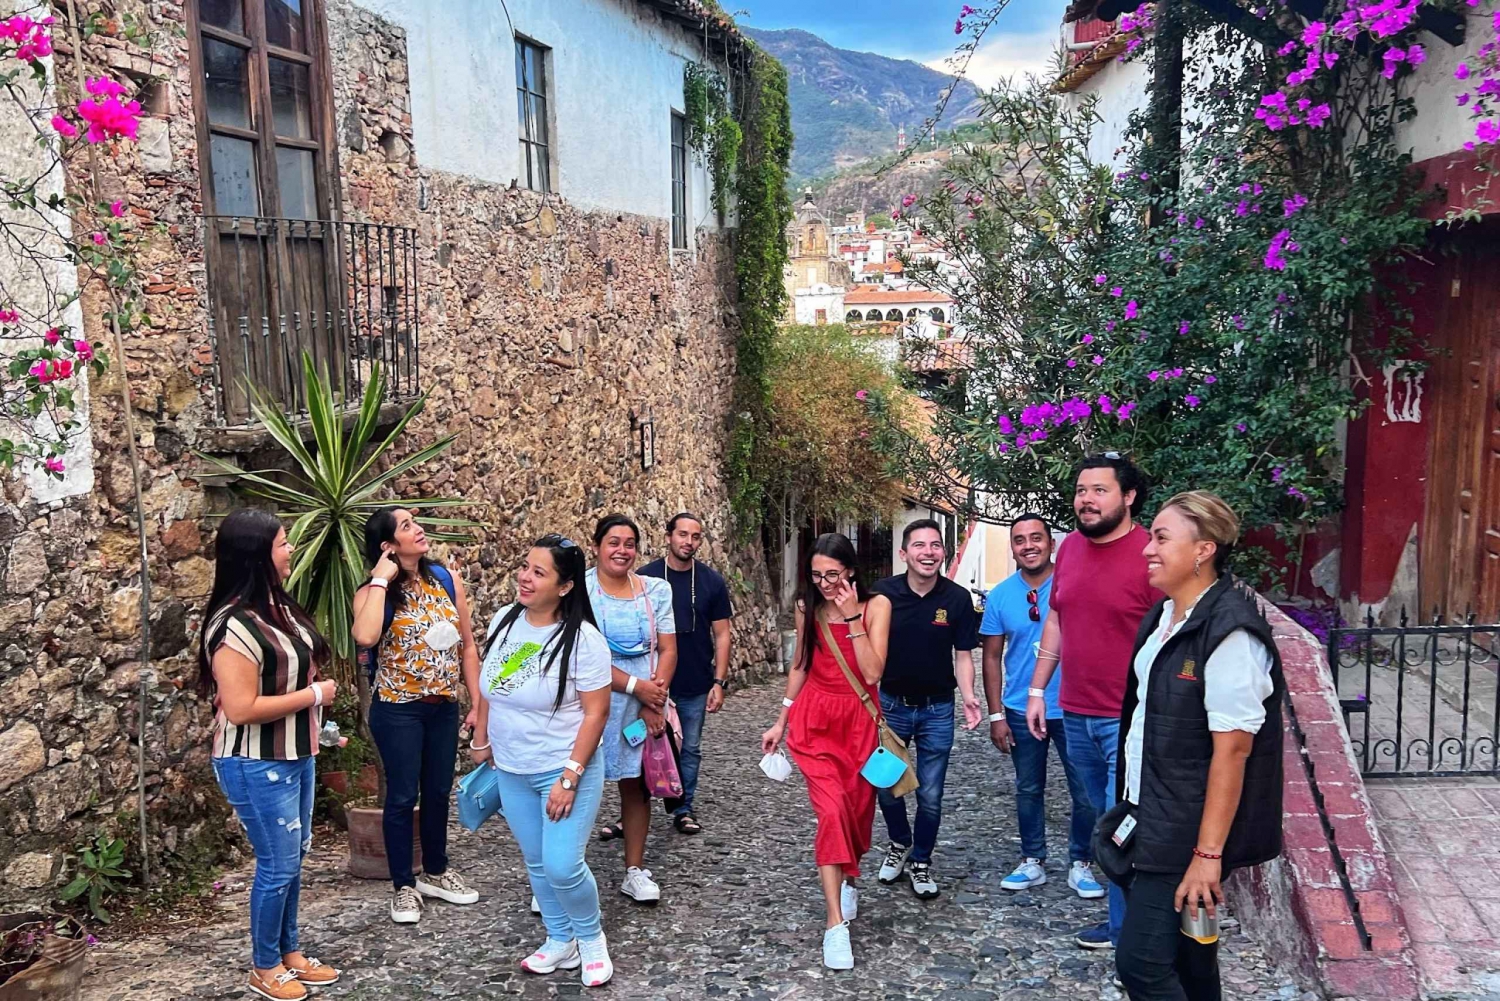 Cuernavaca and Taxco Tour from Mexico City